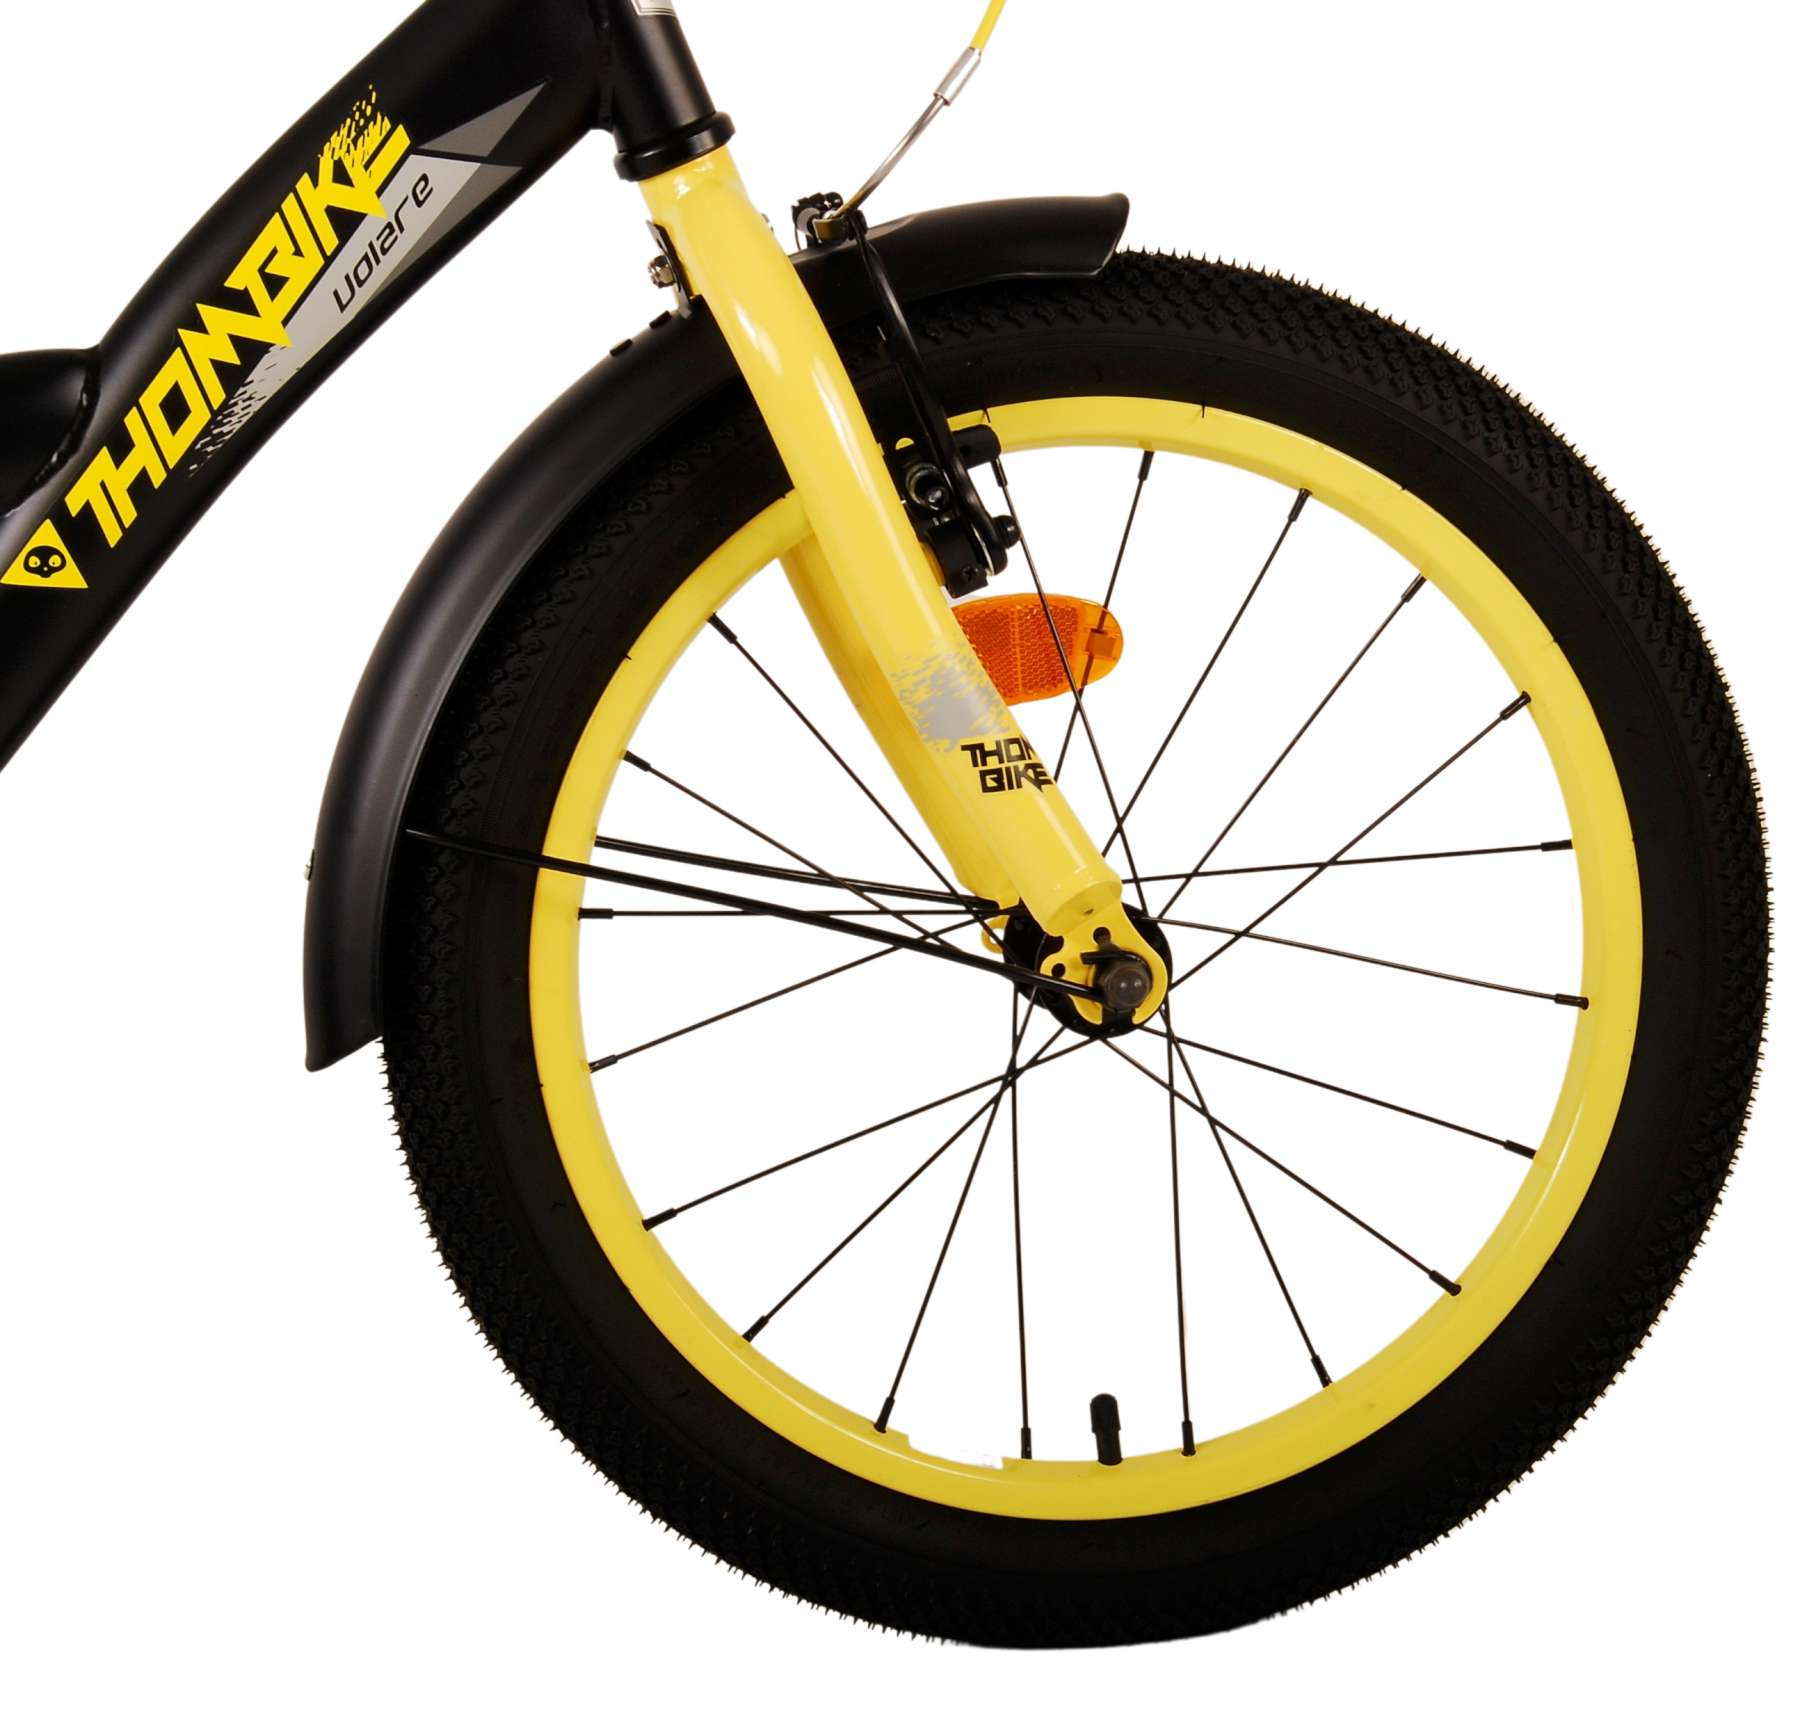 Thombike_18_inch_Geel_-_4-W1800_ohry-ez